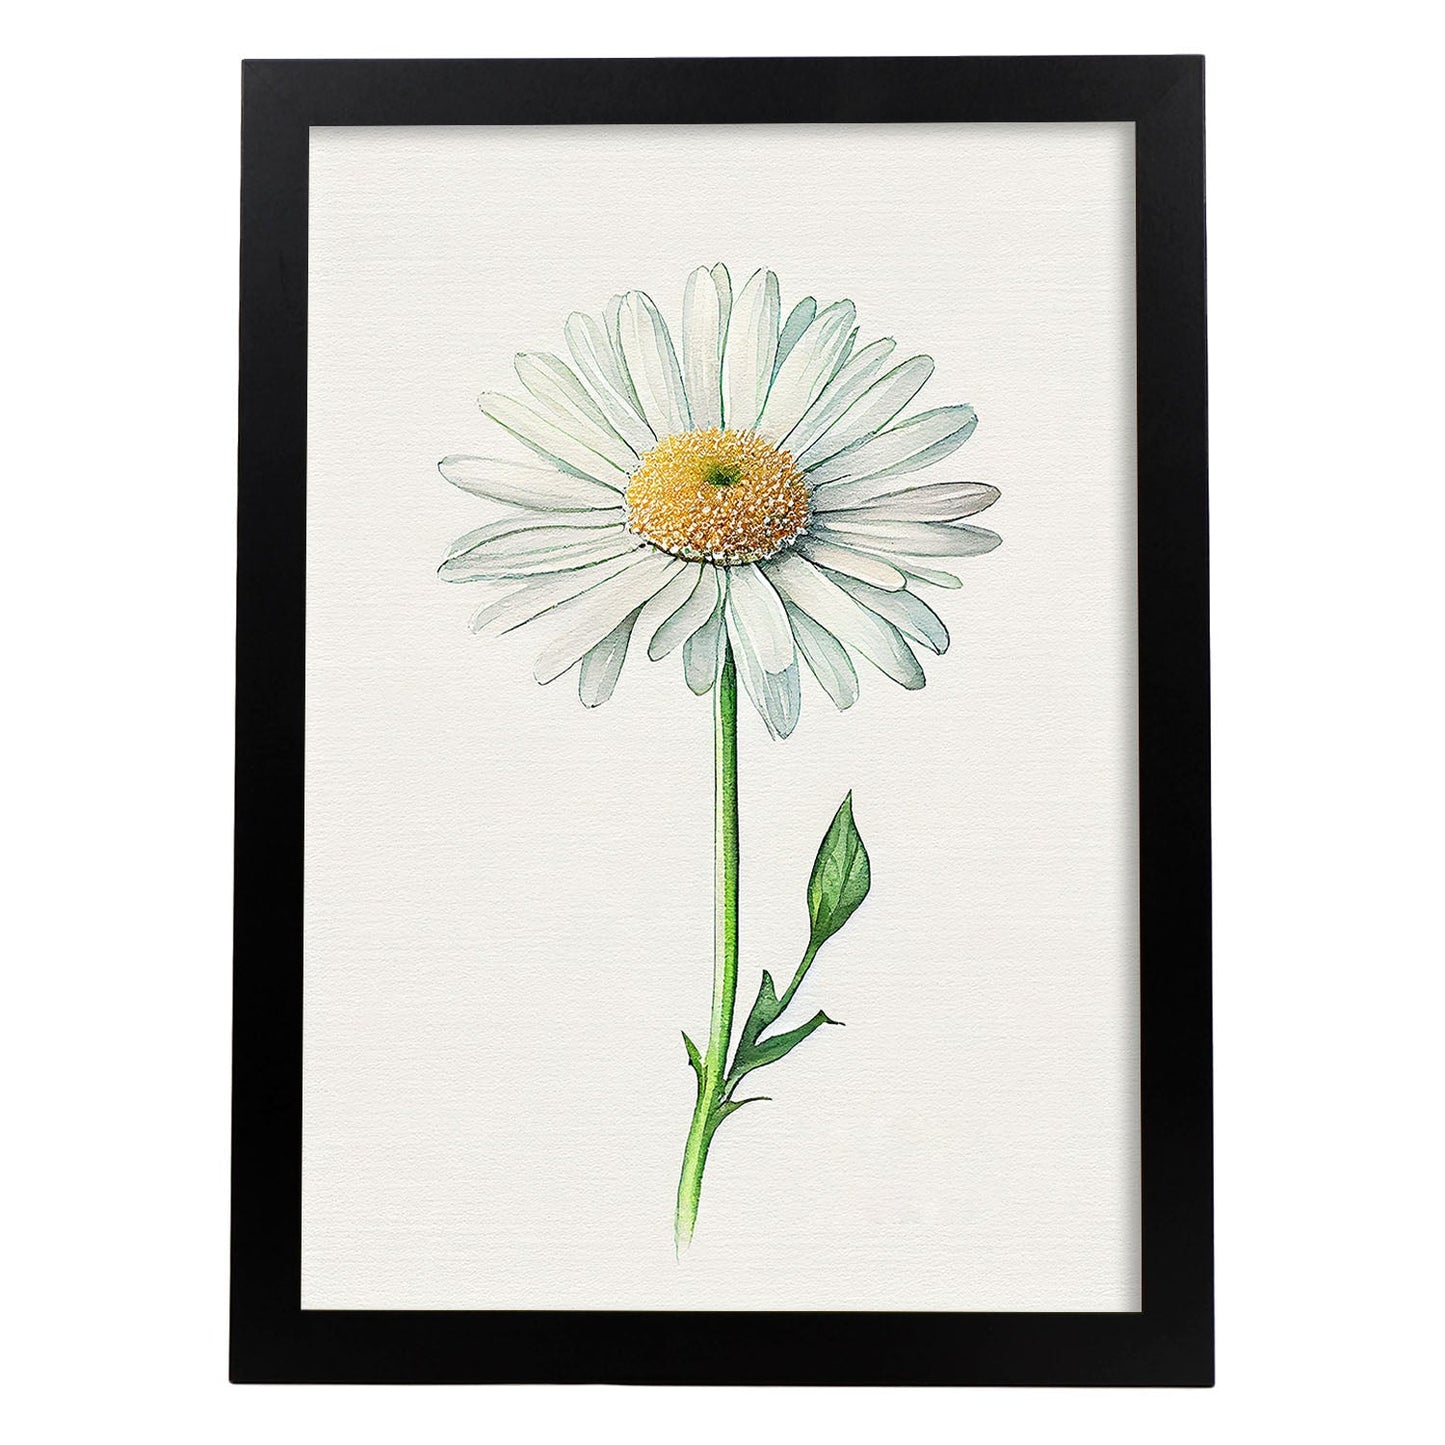 Nacnic watercolor minmal Shasta Daisy_1. Aesthetic Wall Art Prints for Bedroom or Living Room Design.